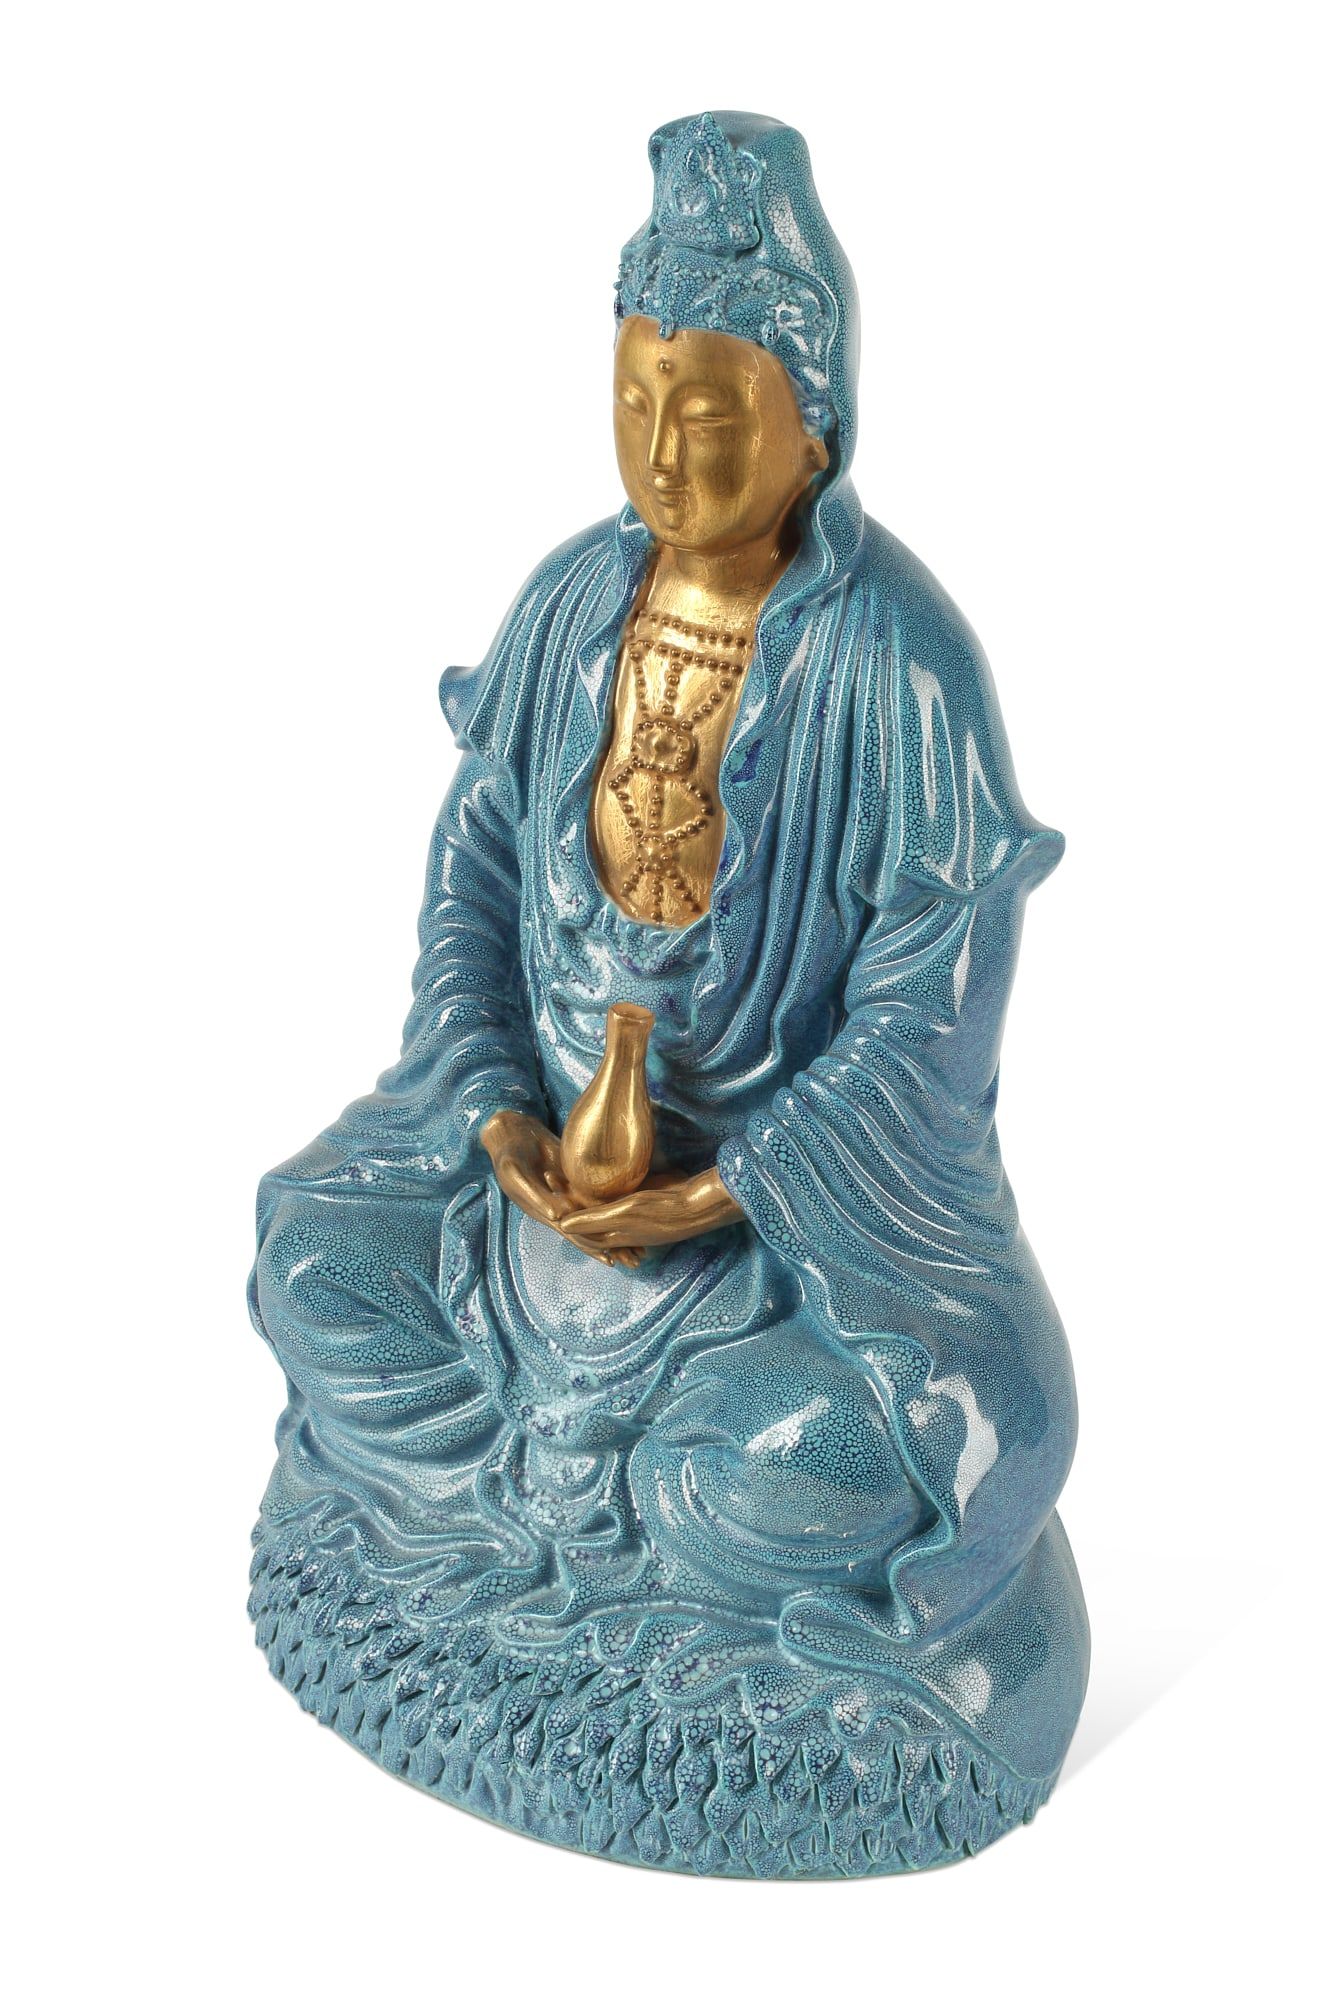 A CHINESE PORCELAIN FIGURE OF A